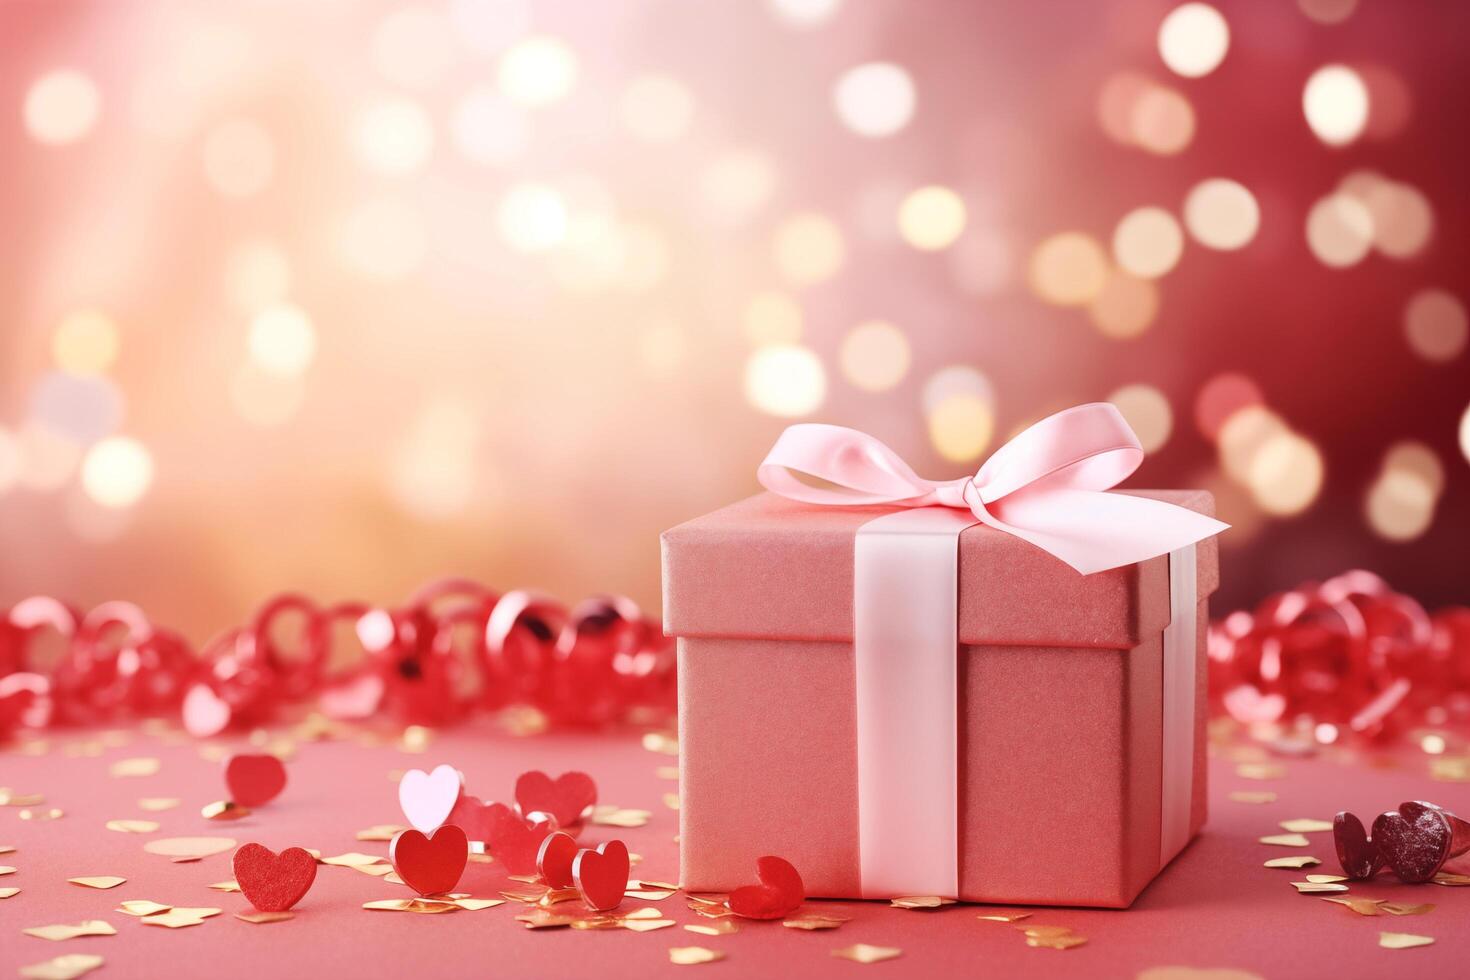 AI generated Red gift box with pink glittering ribbon, pink gift box with white glittering ribbon, many gift box all of center of image,  clear lighting, soft pink and soft gold bokeh background photo